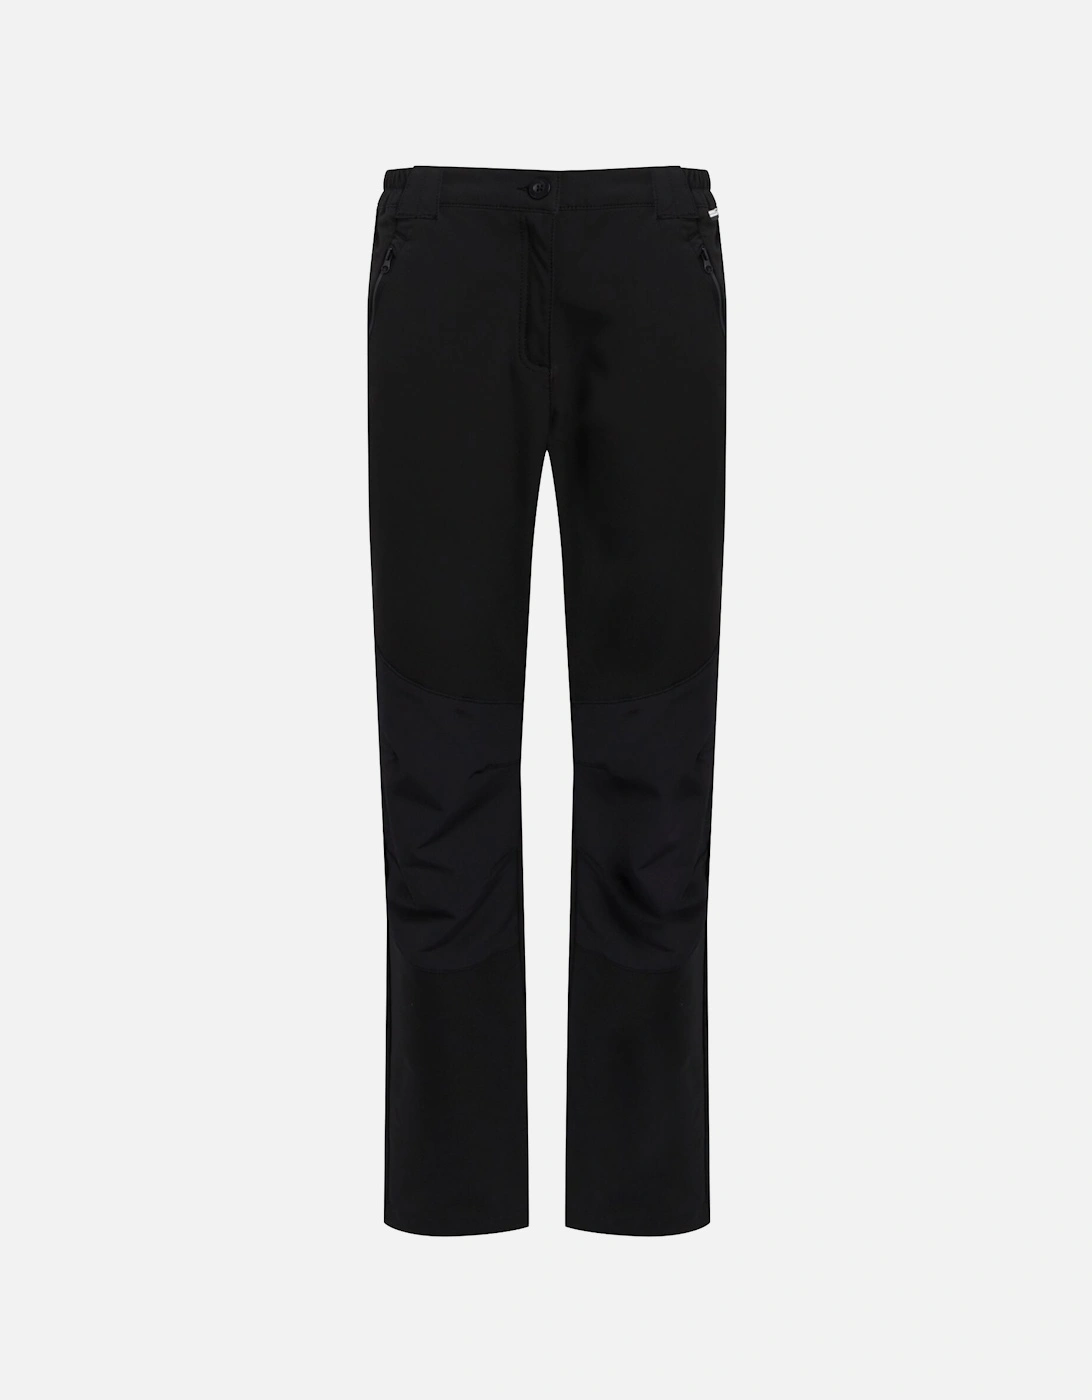 Womens/Ladies Questra V Walking Trousers, 6 of 5